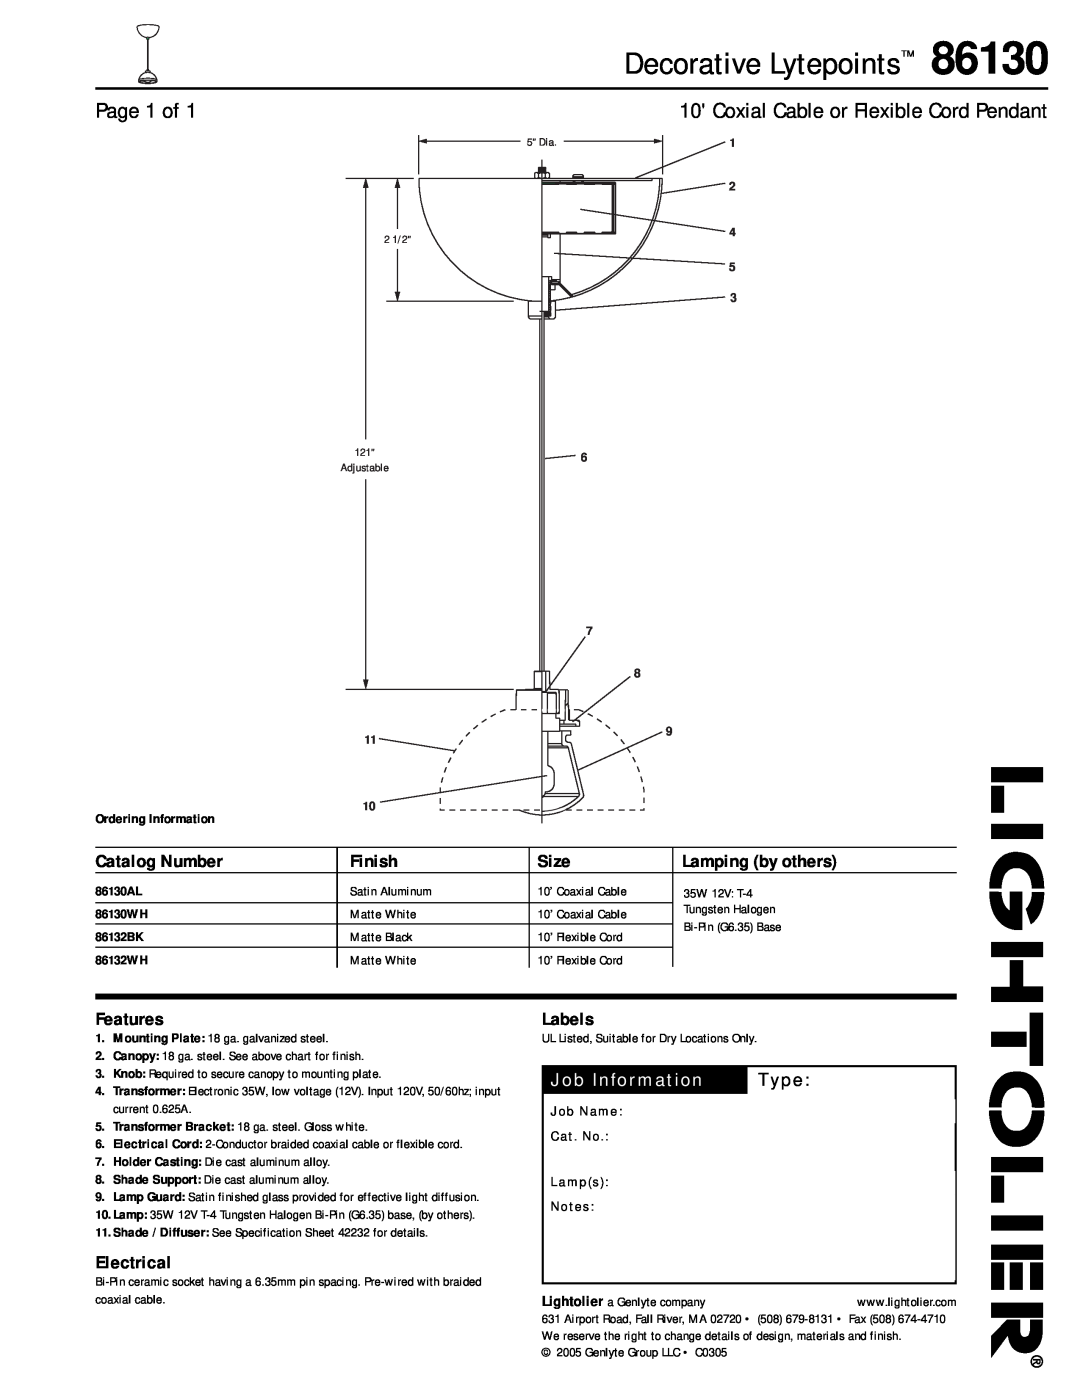 Lightolier 86130 specifications Decorative Lytepoints, Page 1 of, Coxial Cable or Flexible Cord Pendant, Catalog Number 